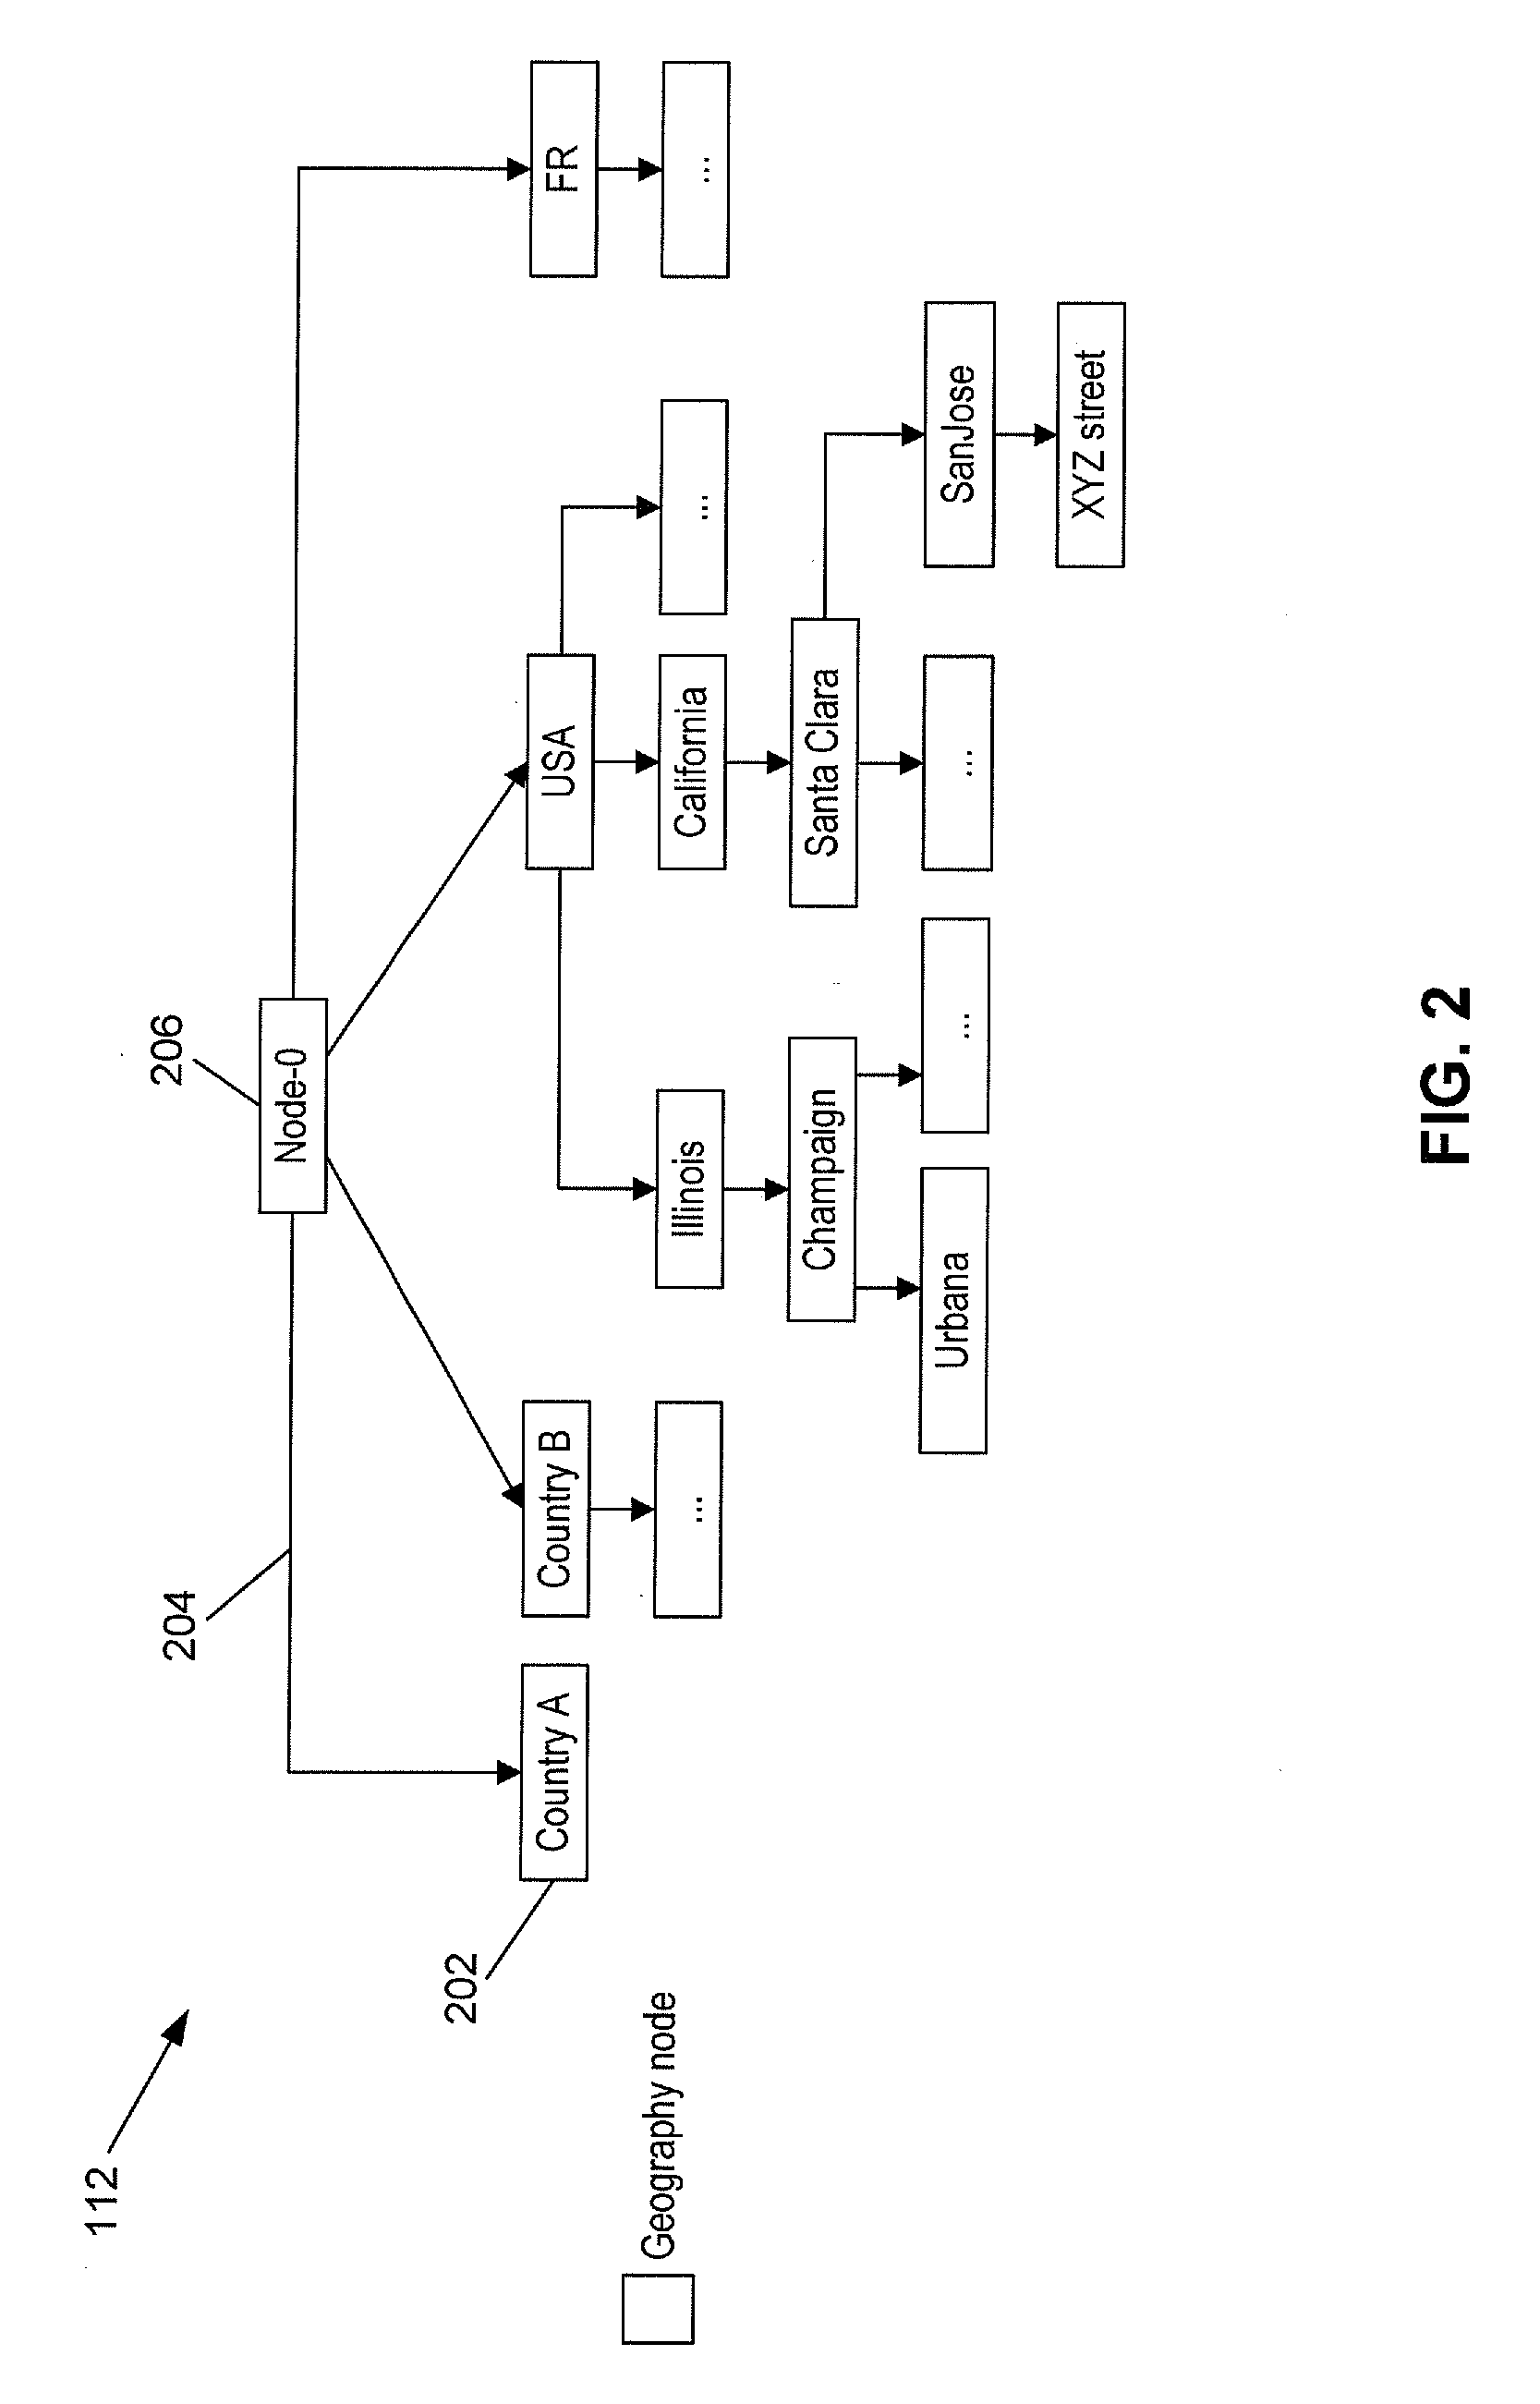 Method and System of Location-Based Content Organization and Content Suggestions